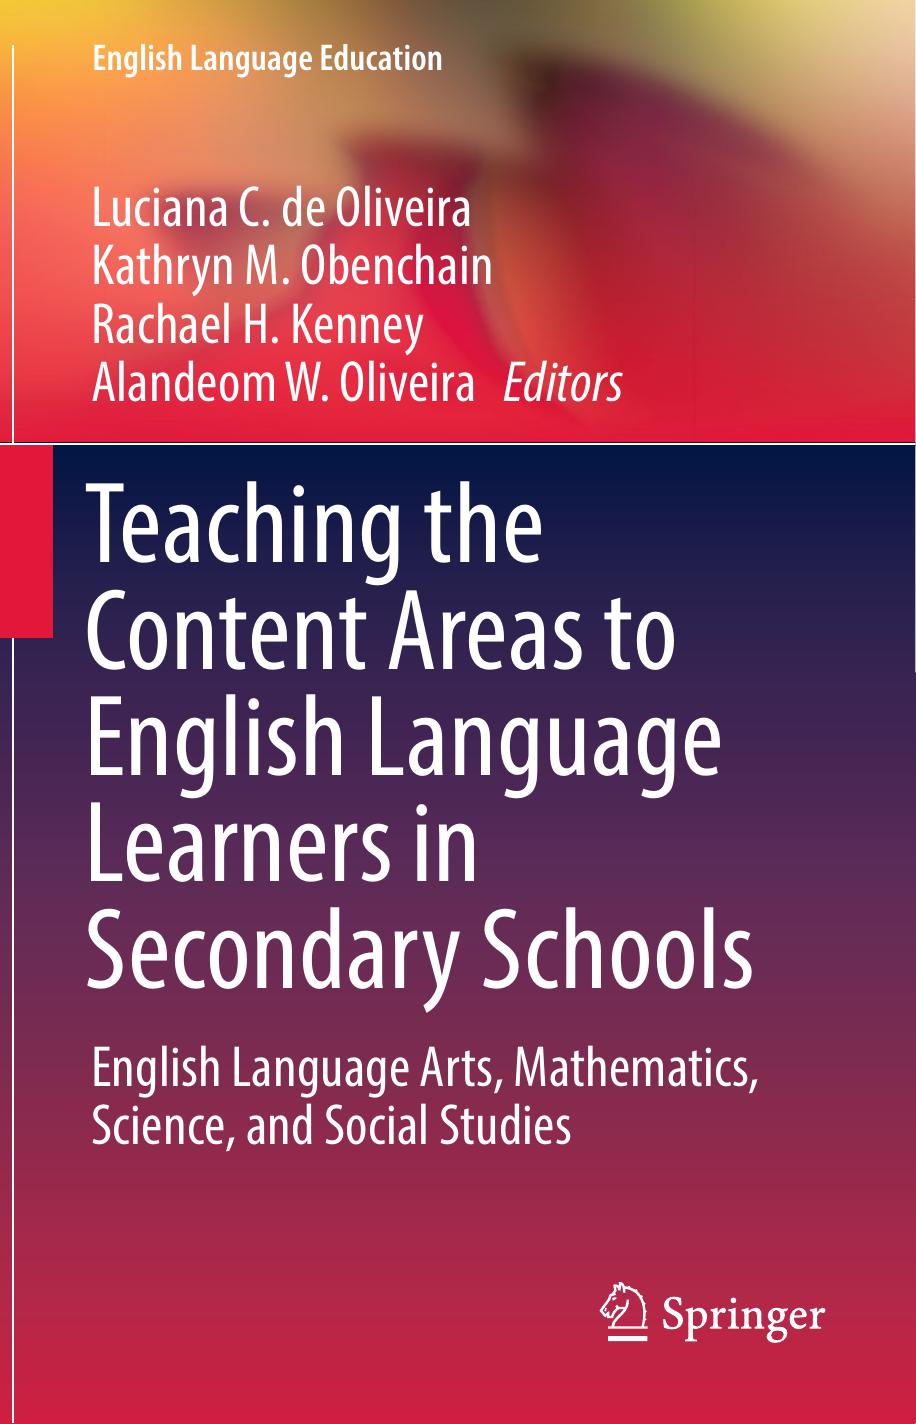 Teaching the Content Areas to English Language Learners in Secondary Schools 2019.pdf